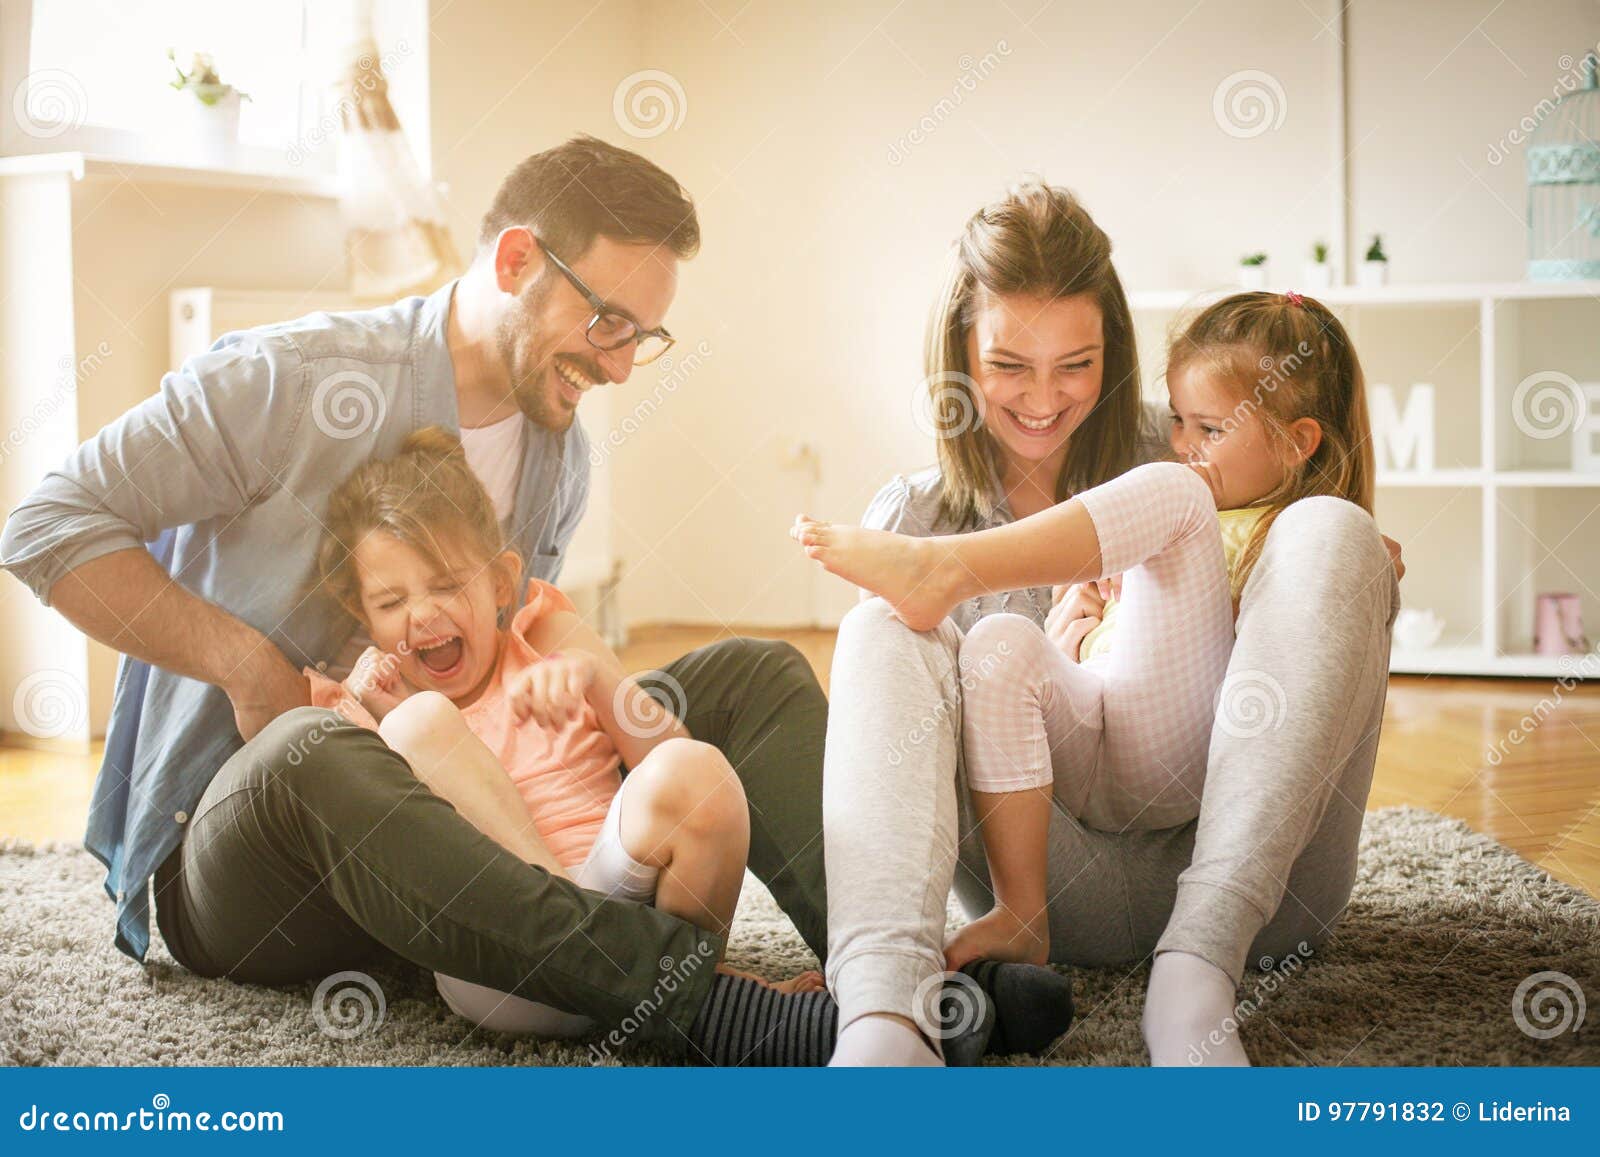 happy family with two daughters playing at home.